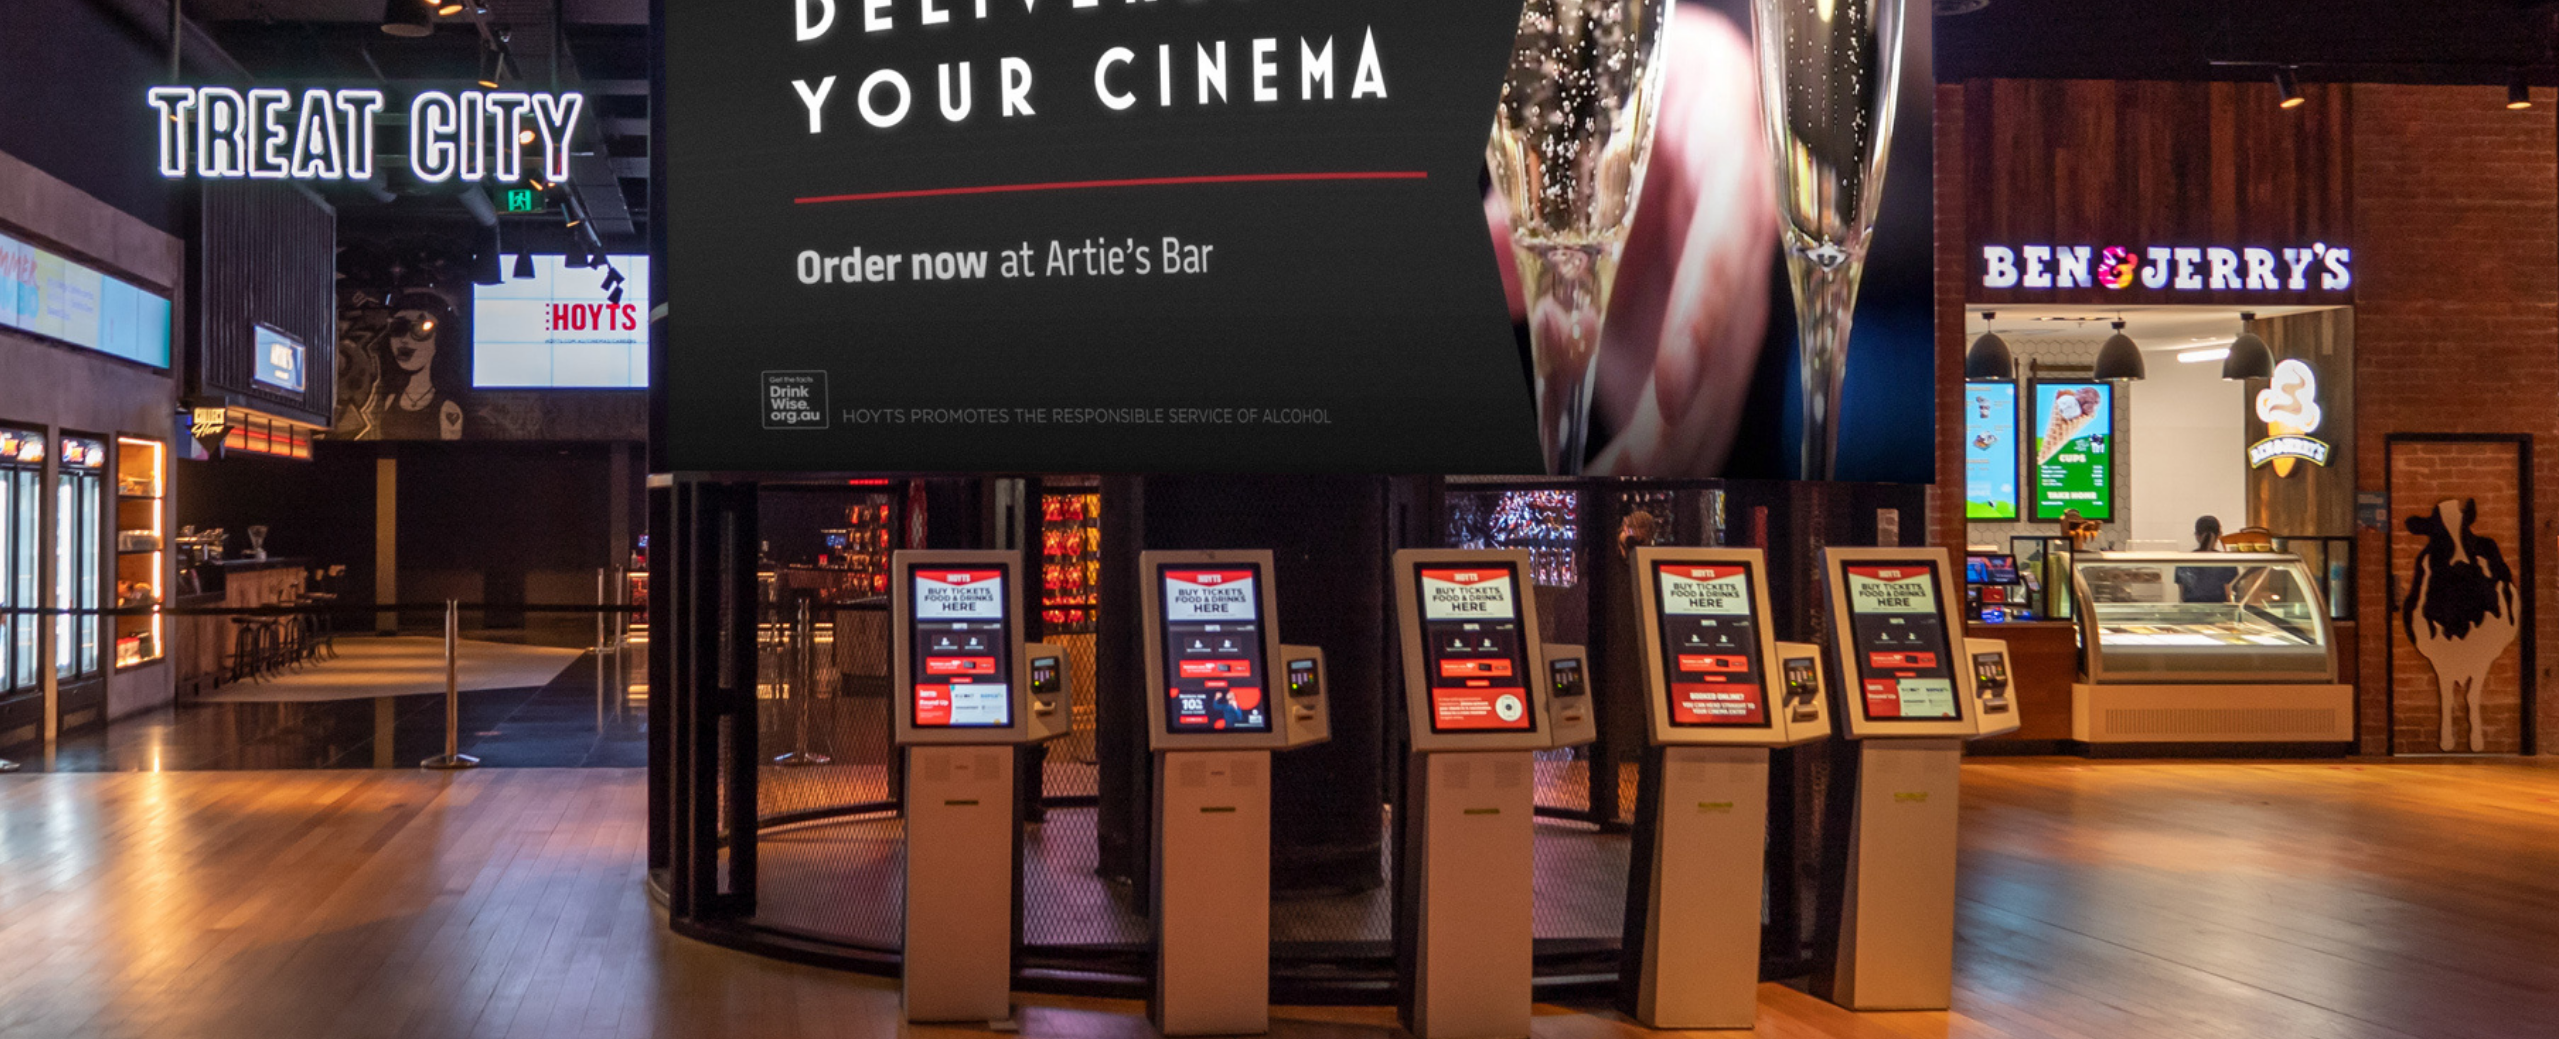 High point hoyts imax session times forex types of investments in forex